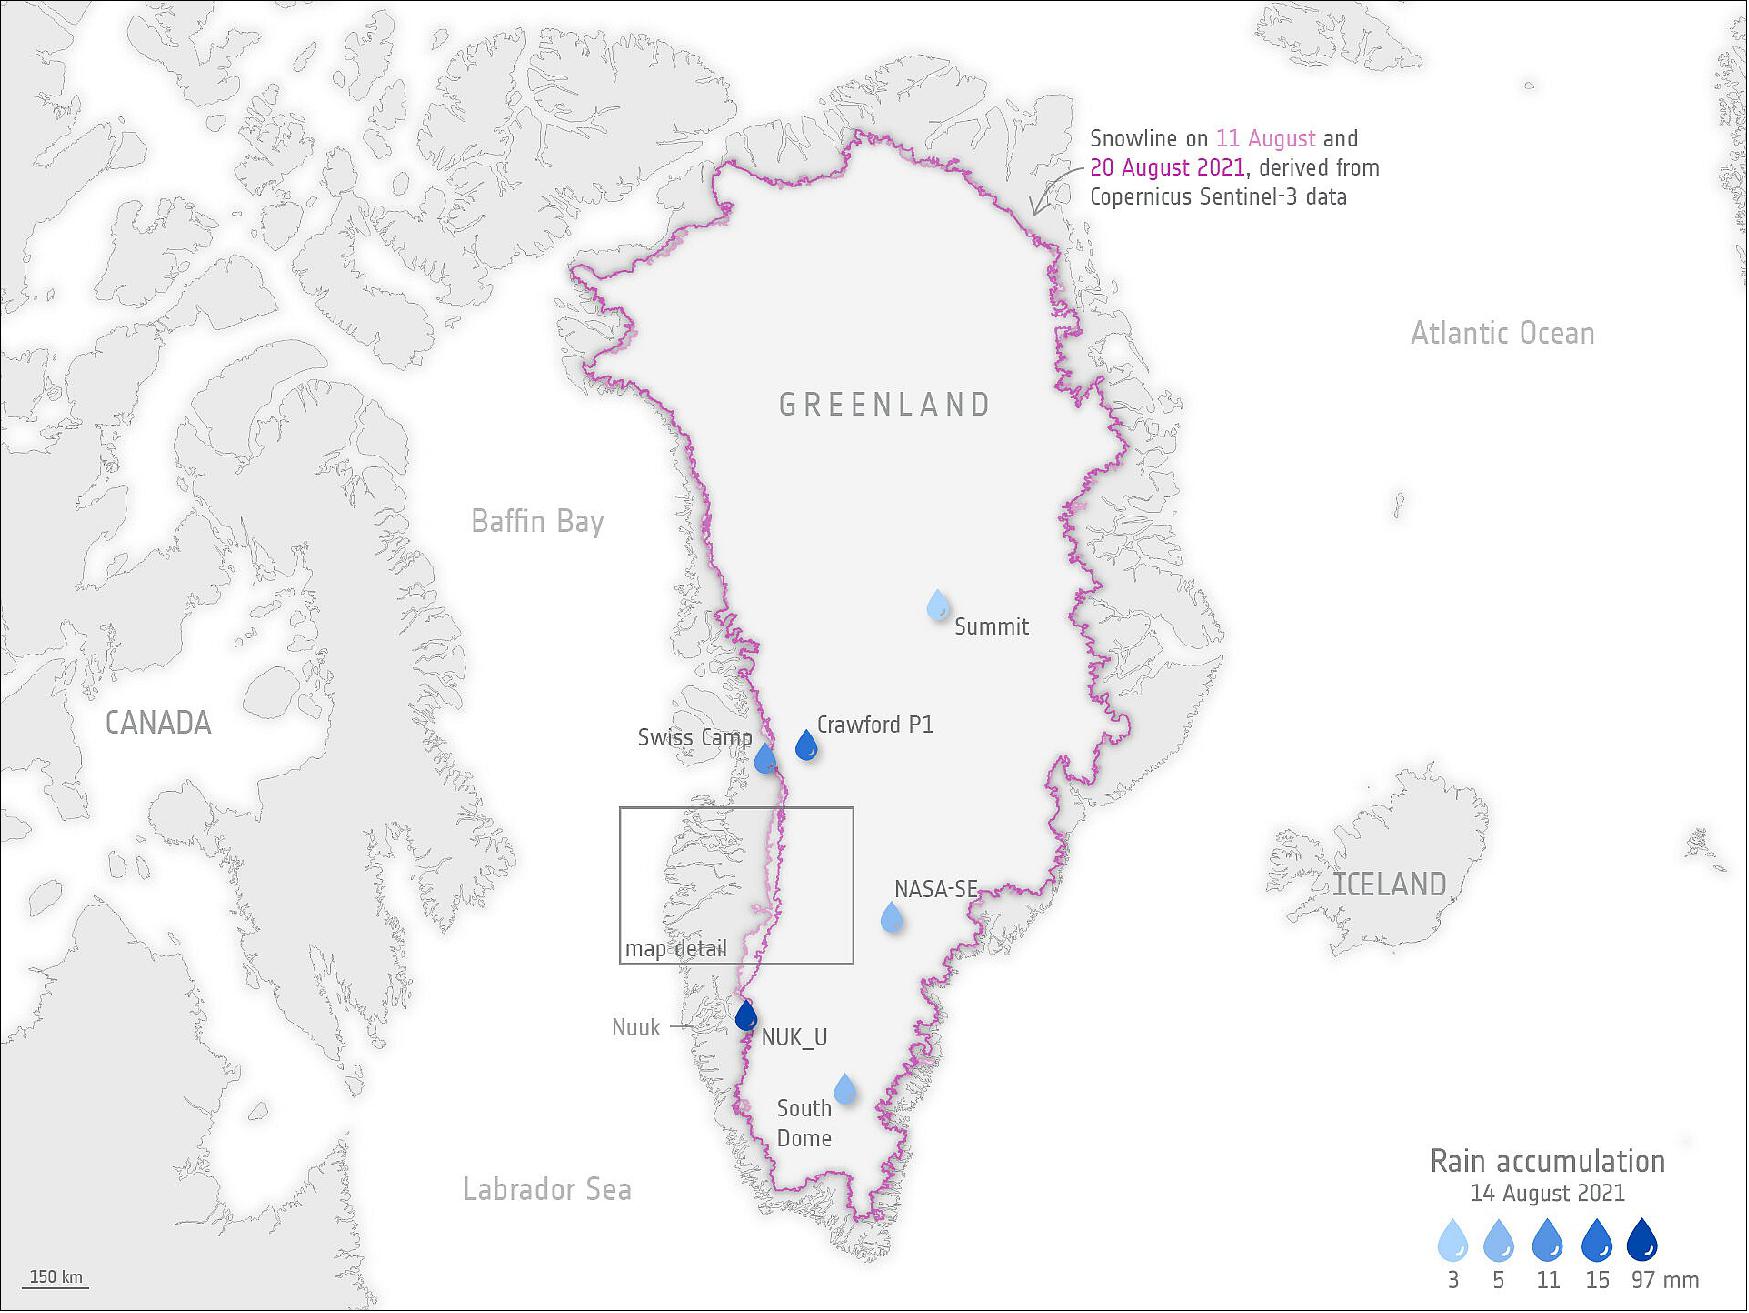 Figure 17: Greenland snowline retreat and rainfall. In the summer of 2021, unusually warm atmospheric rivers swept along Greenland, bringing potent melt conditions when the melt season was drawing to a close. Although this heatwave was followed by never-before-seen rainfall, it was the heat that led to a major melt. Researchers found that this melt, for example, caused Greenland’s ice sheet near Kangerlussuaq to retreat by 788 metres, exposing a wide area of dark bare ice. The map is based on observations from the Copernicus Sentinel-3 mission to show the snowline retreat between 11 August and 20 August 2021, and from GEUS’ PROMICE and GC-Net weather stations to show rainfall. Click here to see the zoom in indicated by the grey square over southwest Greenland.